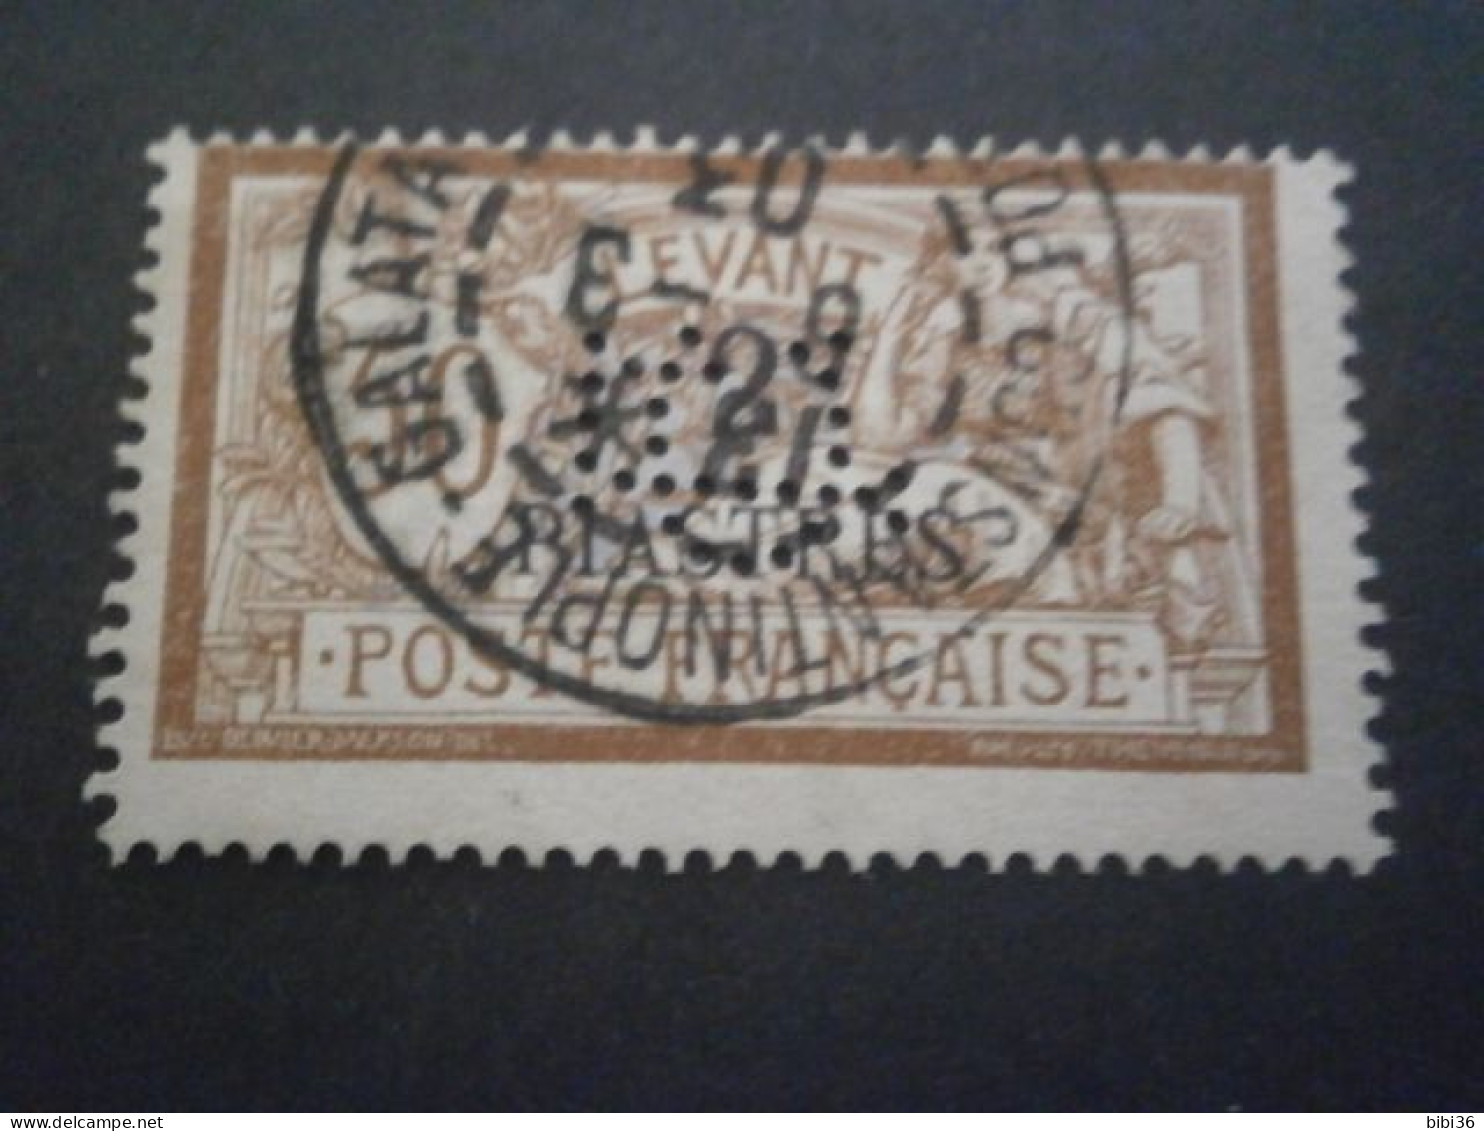 LEVANT MERSON 20 CL5 PERFORATION PERFORES PERFORE PERFIN PERFINS PERFORATION PERFORIERT LOCHUNG PERCE PERFORIERT PERFO - Used Stamps